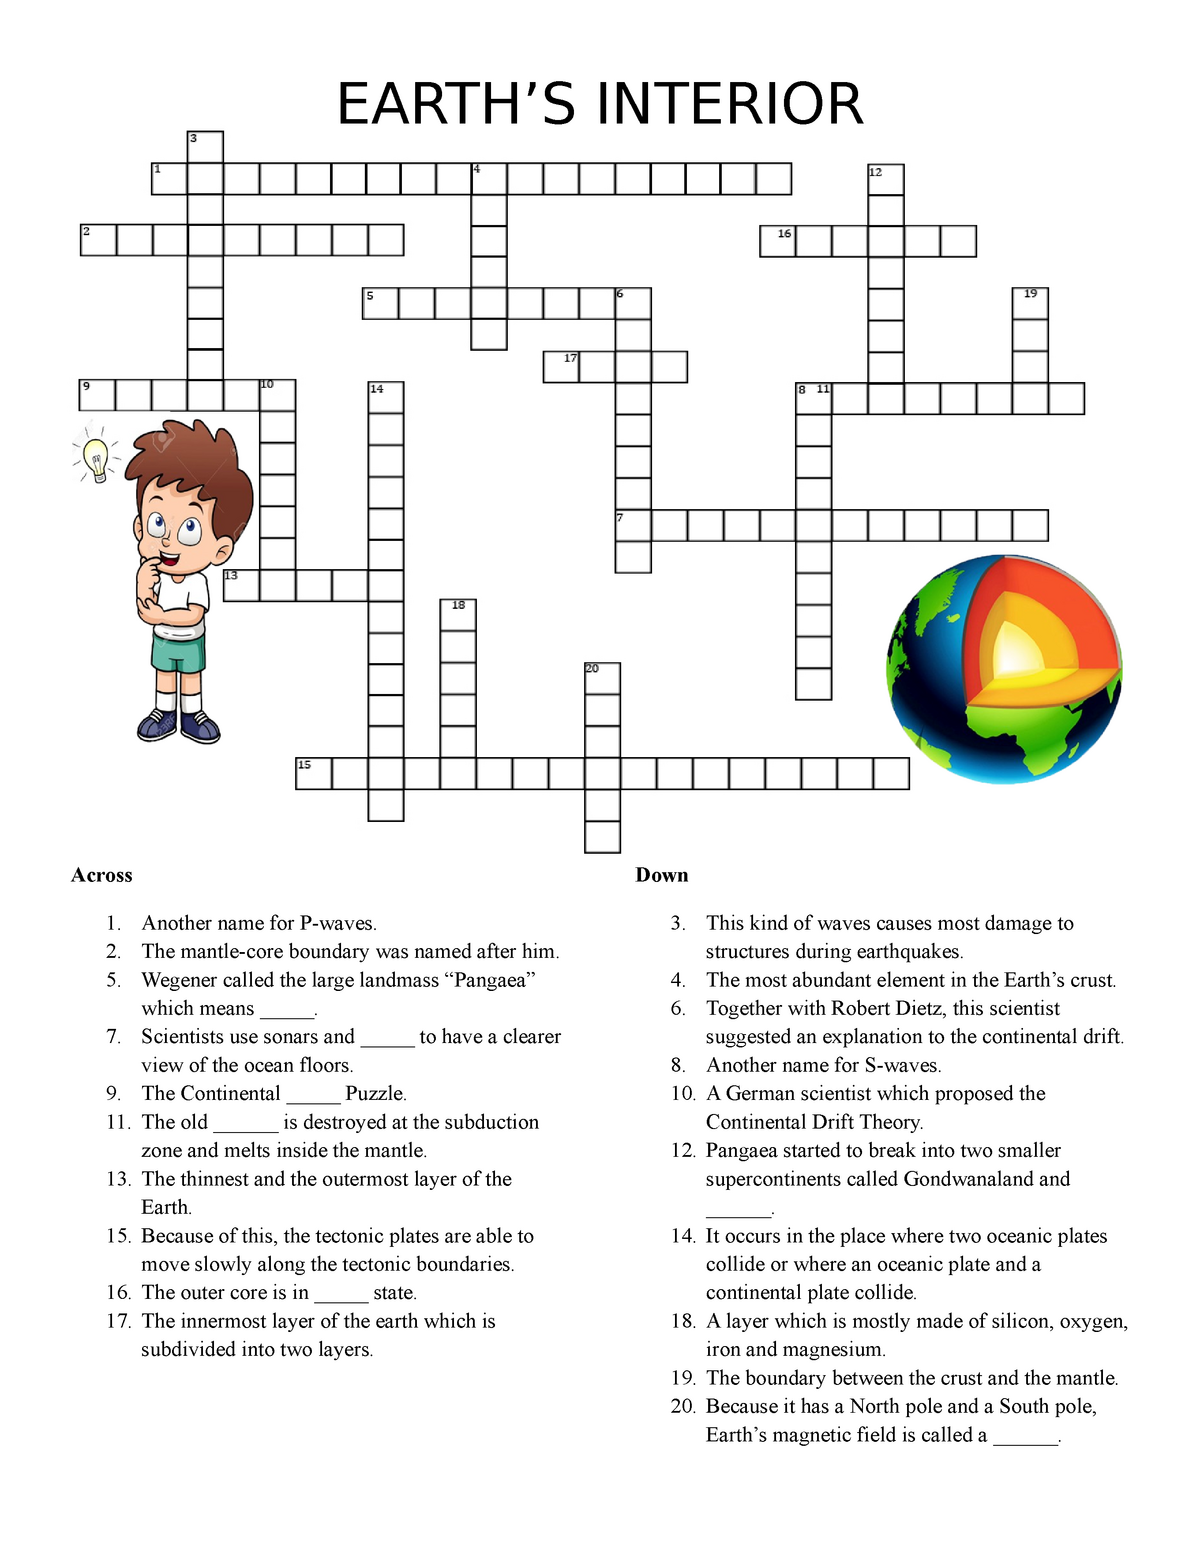 Final Crossword True or False 1 Income form business is a passive